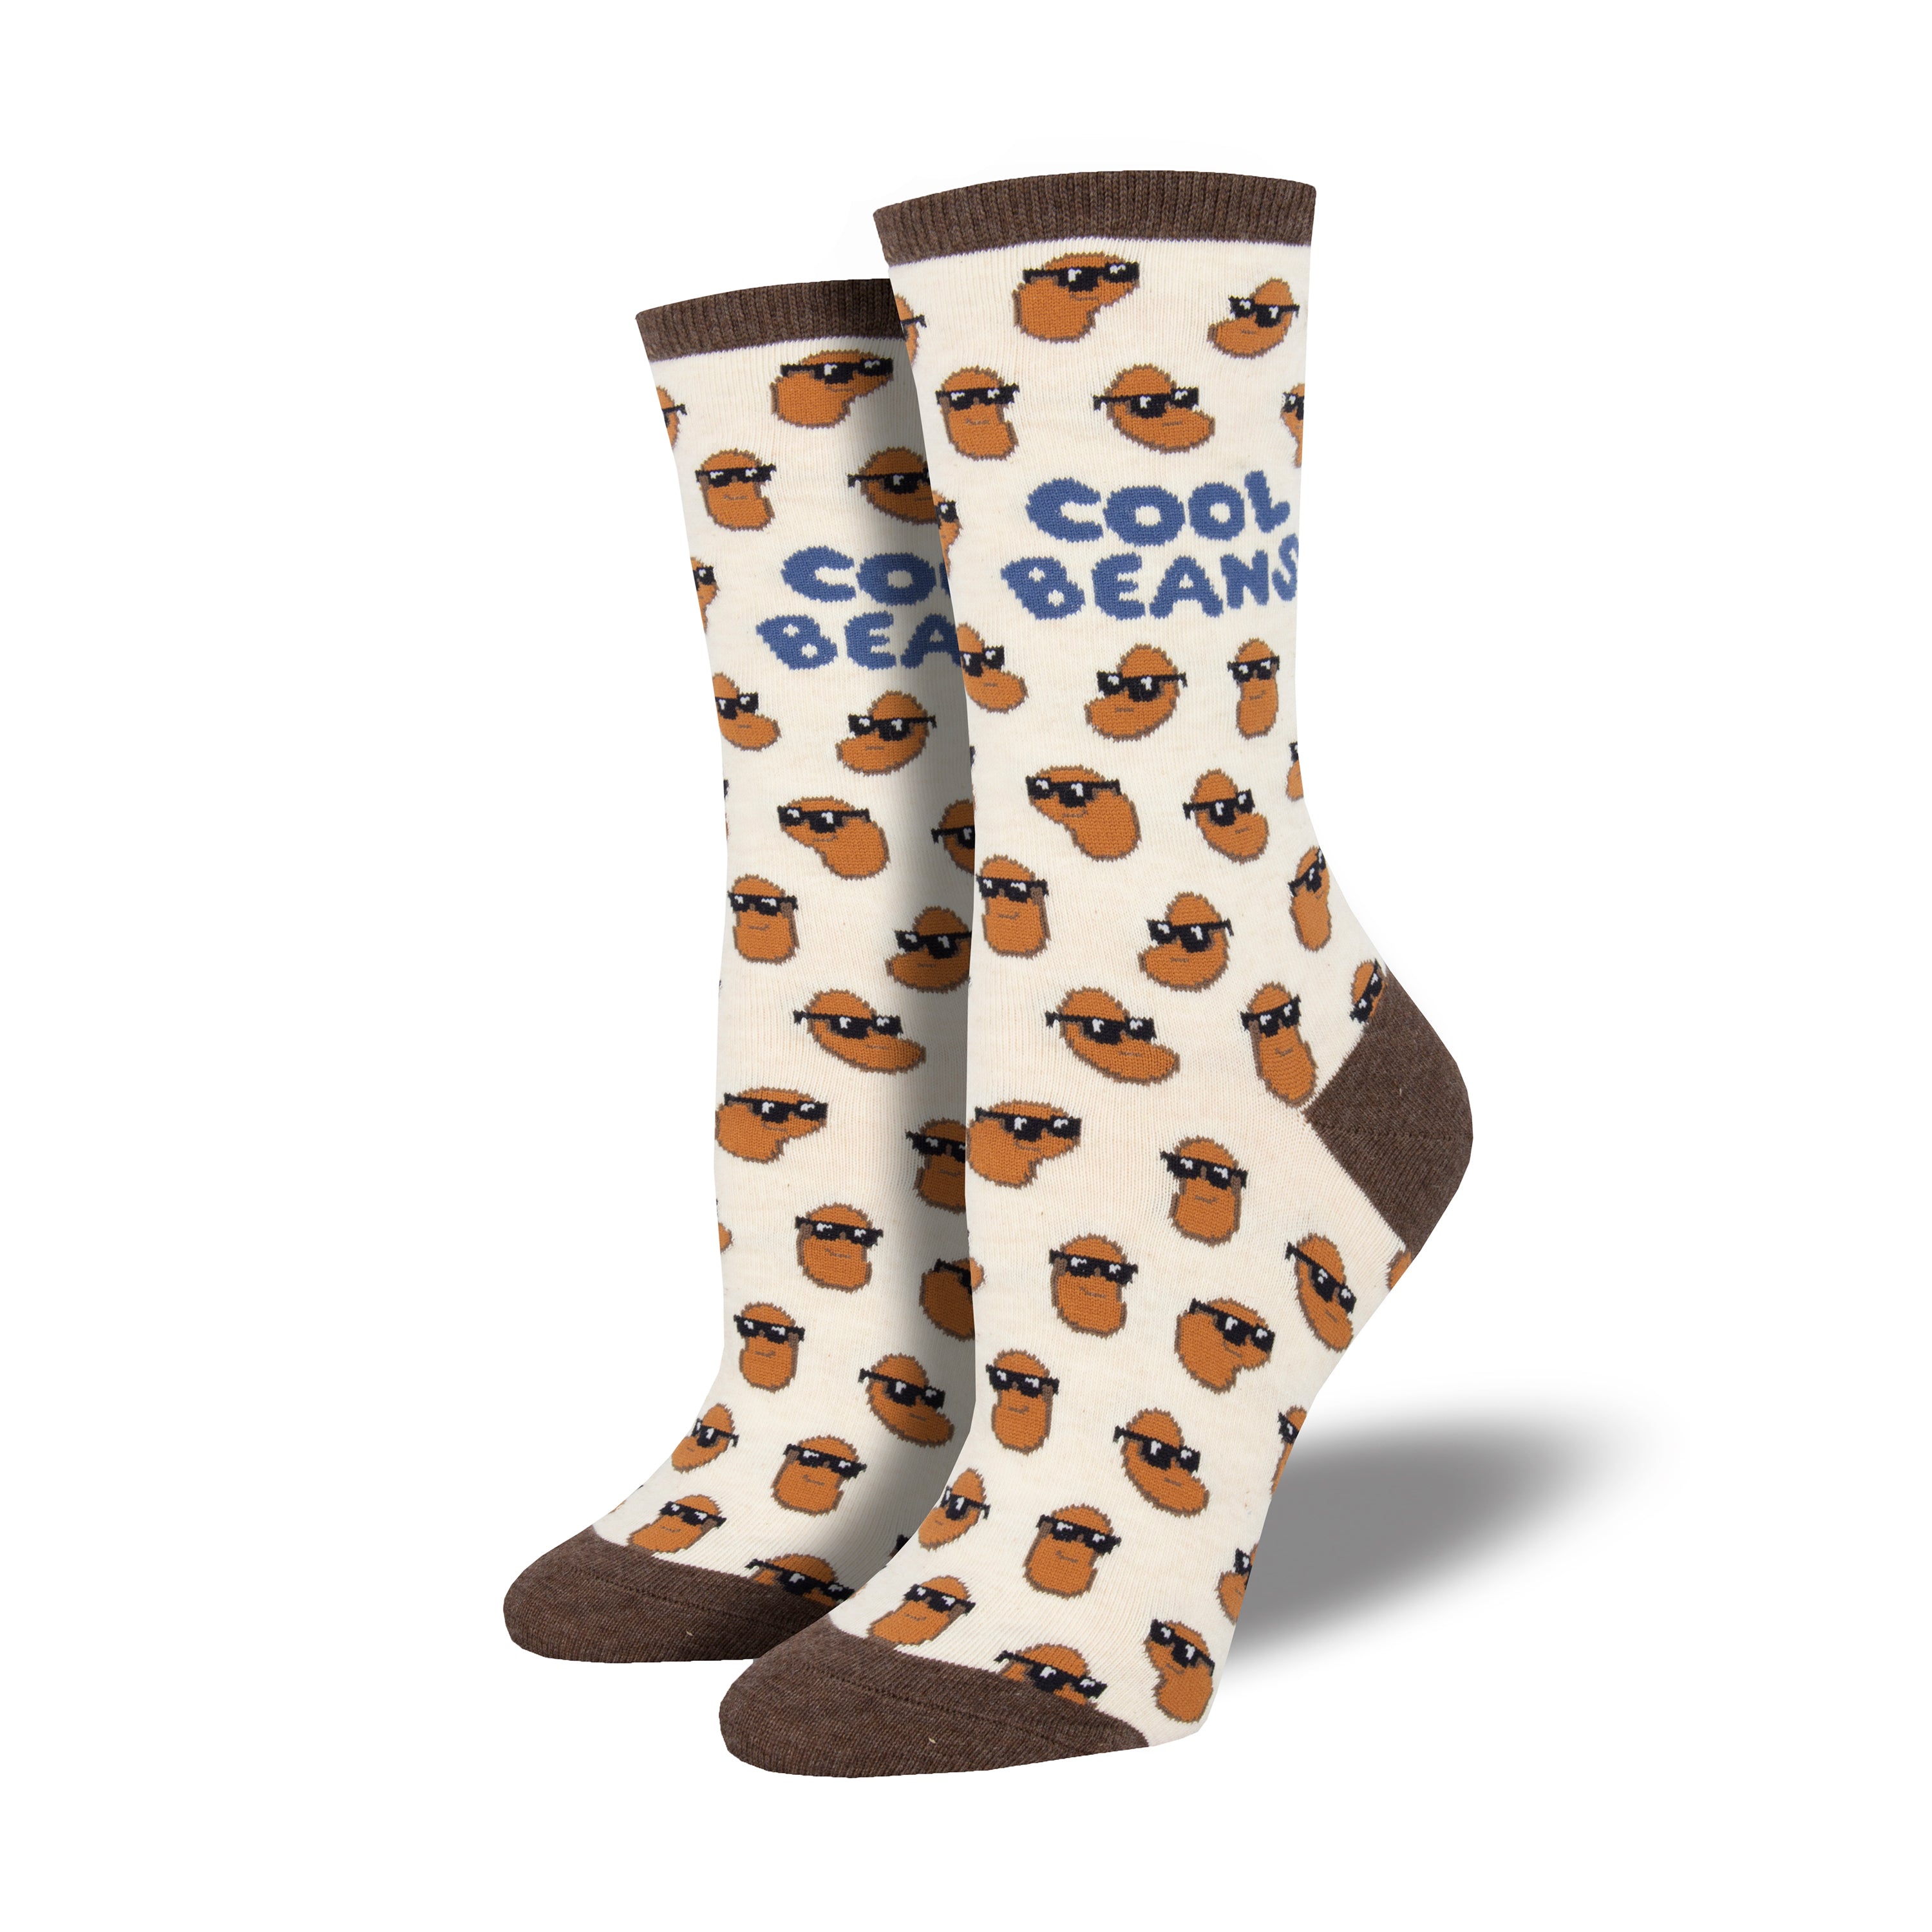 Shown on leg forms, a pair of Sock Smith brand women's cotton crew socks in ivory with a brown heel, toe, and cuff. The sock features an all over motif of little brown beans in black sunglasses, the leg of the sock reads, 